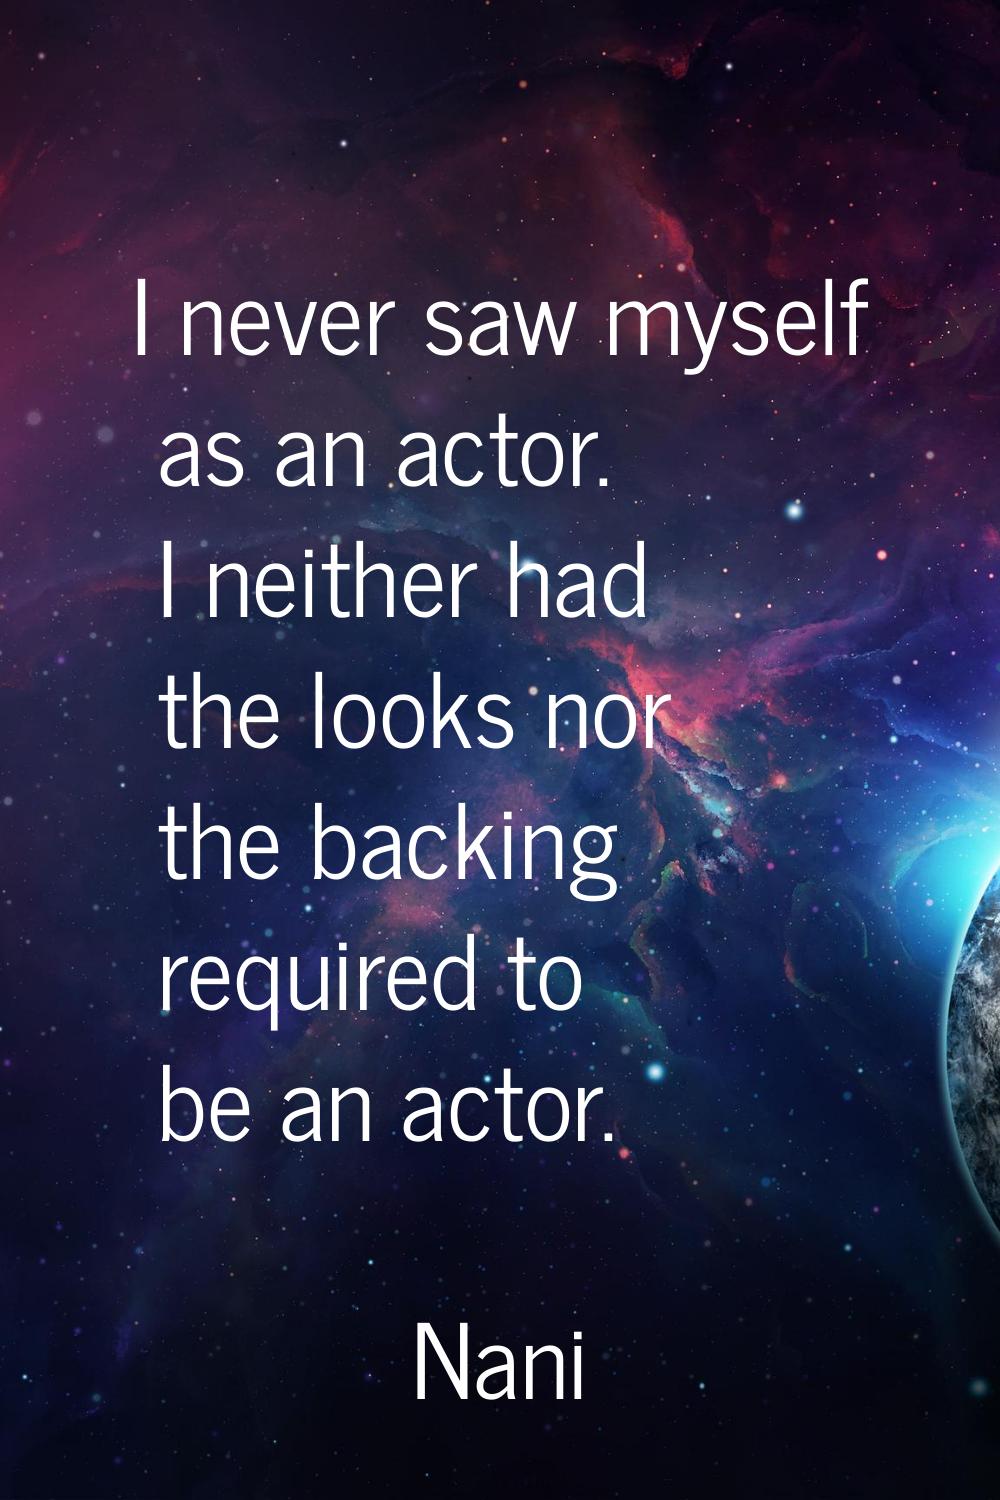 I never saw myself as an actor. I neither had the looks nor the backing required to be an actor.